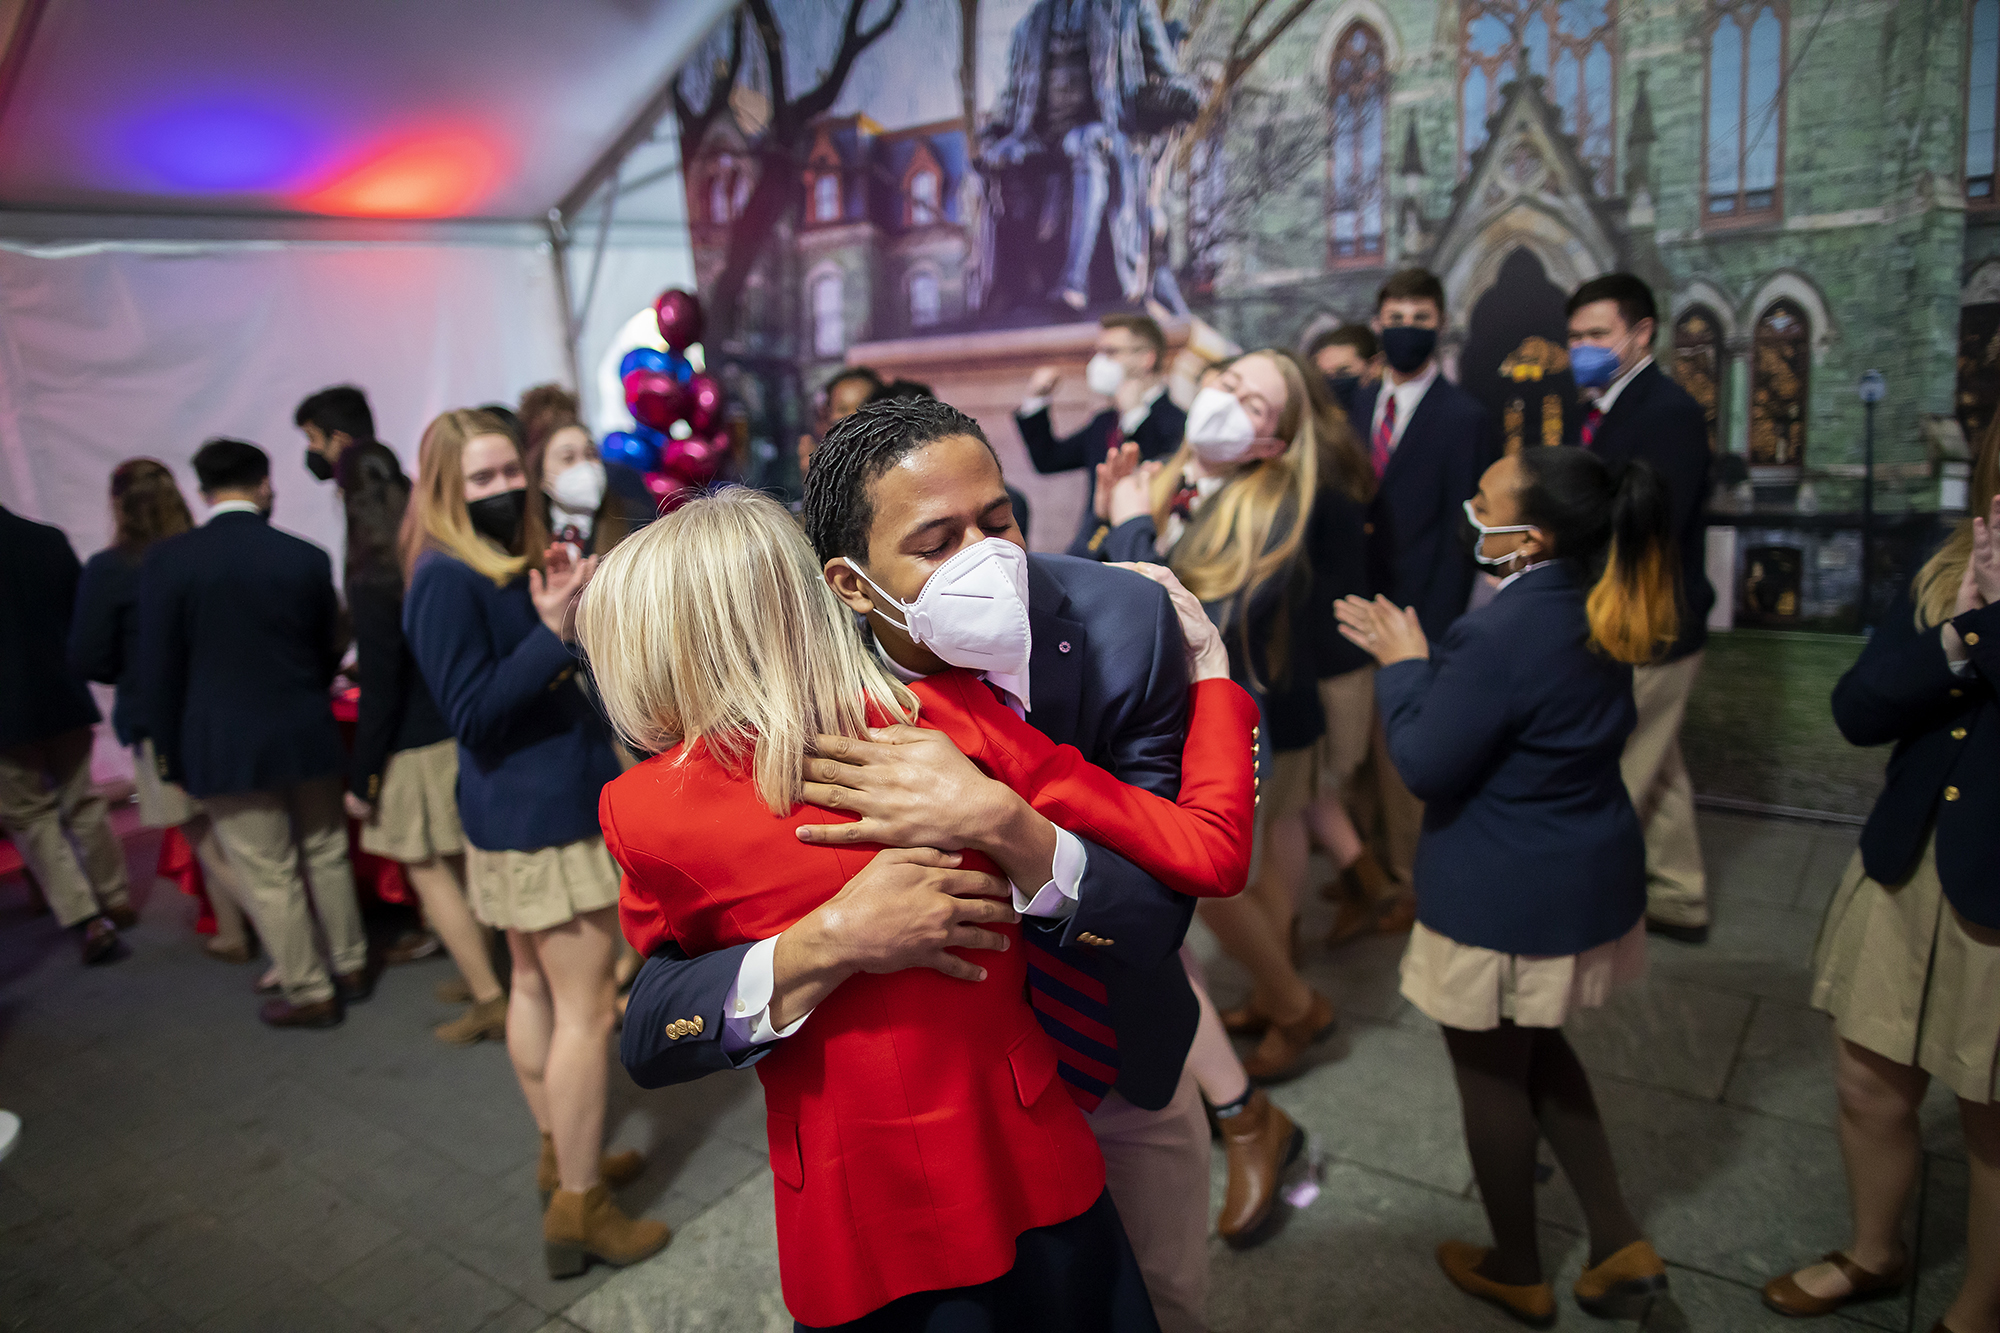 Penn President Amy Gutmann hugging someone at her farewell party.